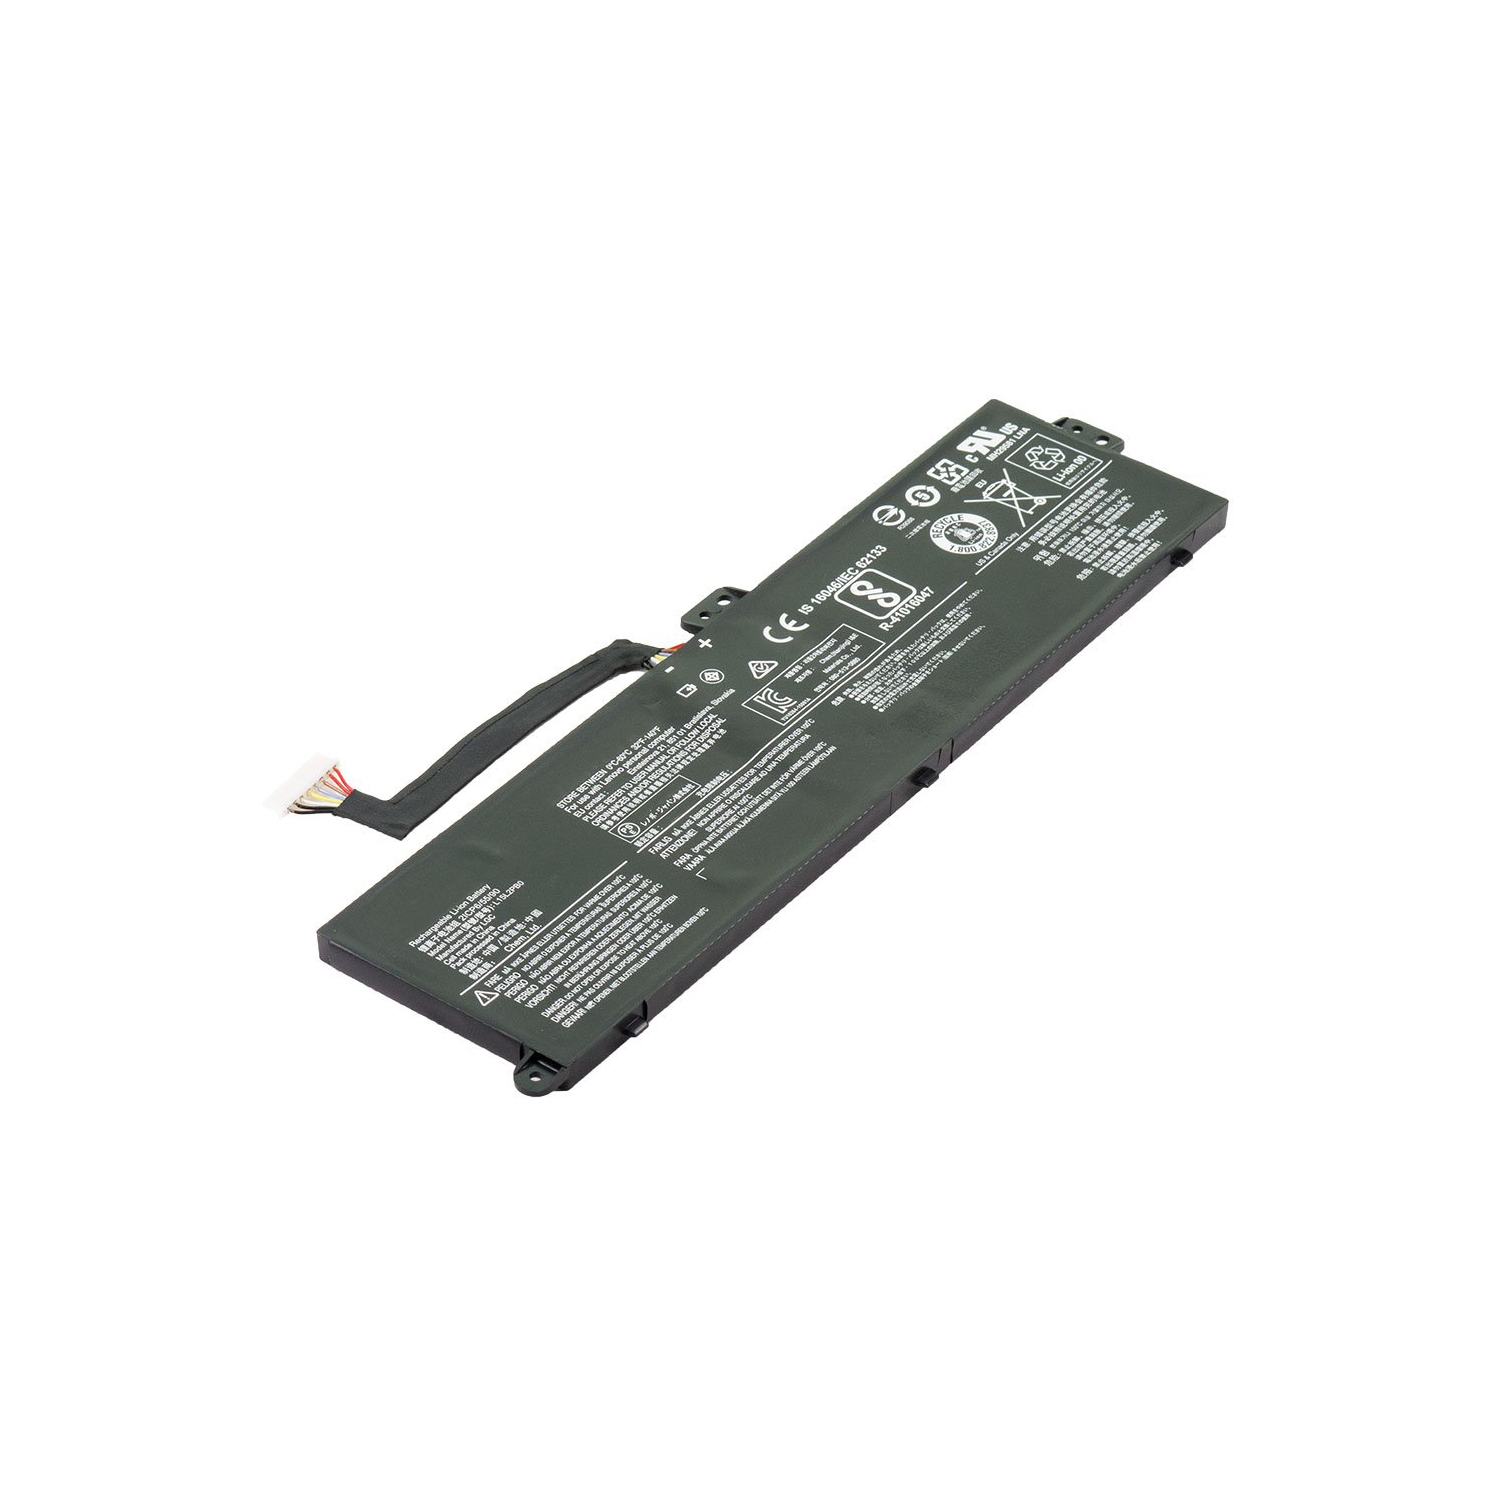 Laptop Battery Replacement for Lenovo 100S Chromebook-11IBY 80QN0009US, 5B10J46559, 5B10J46560, 5B10J46561, L15L2PB0, L15M2PB0